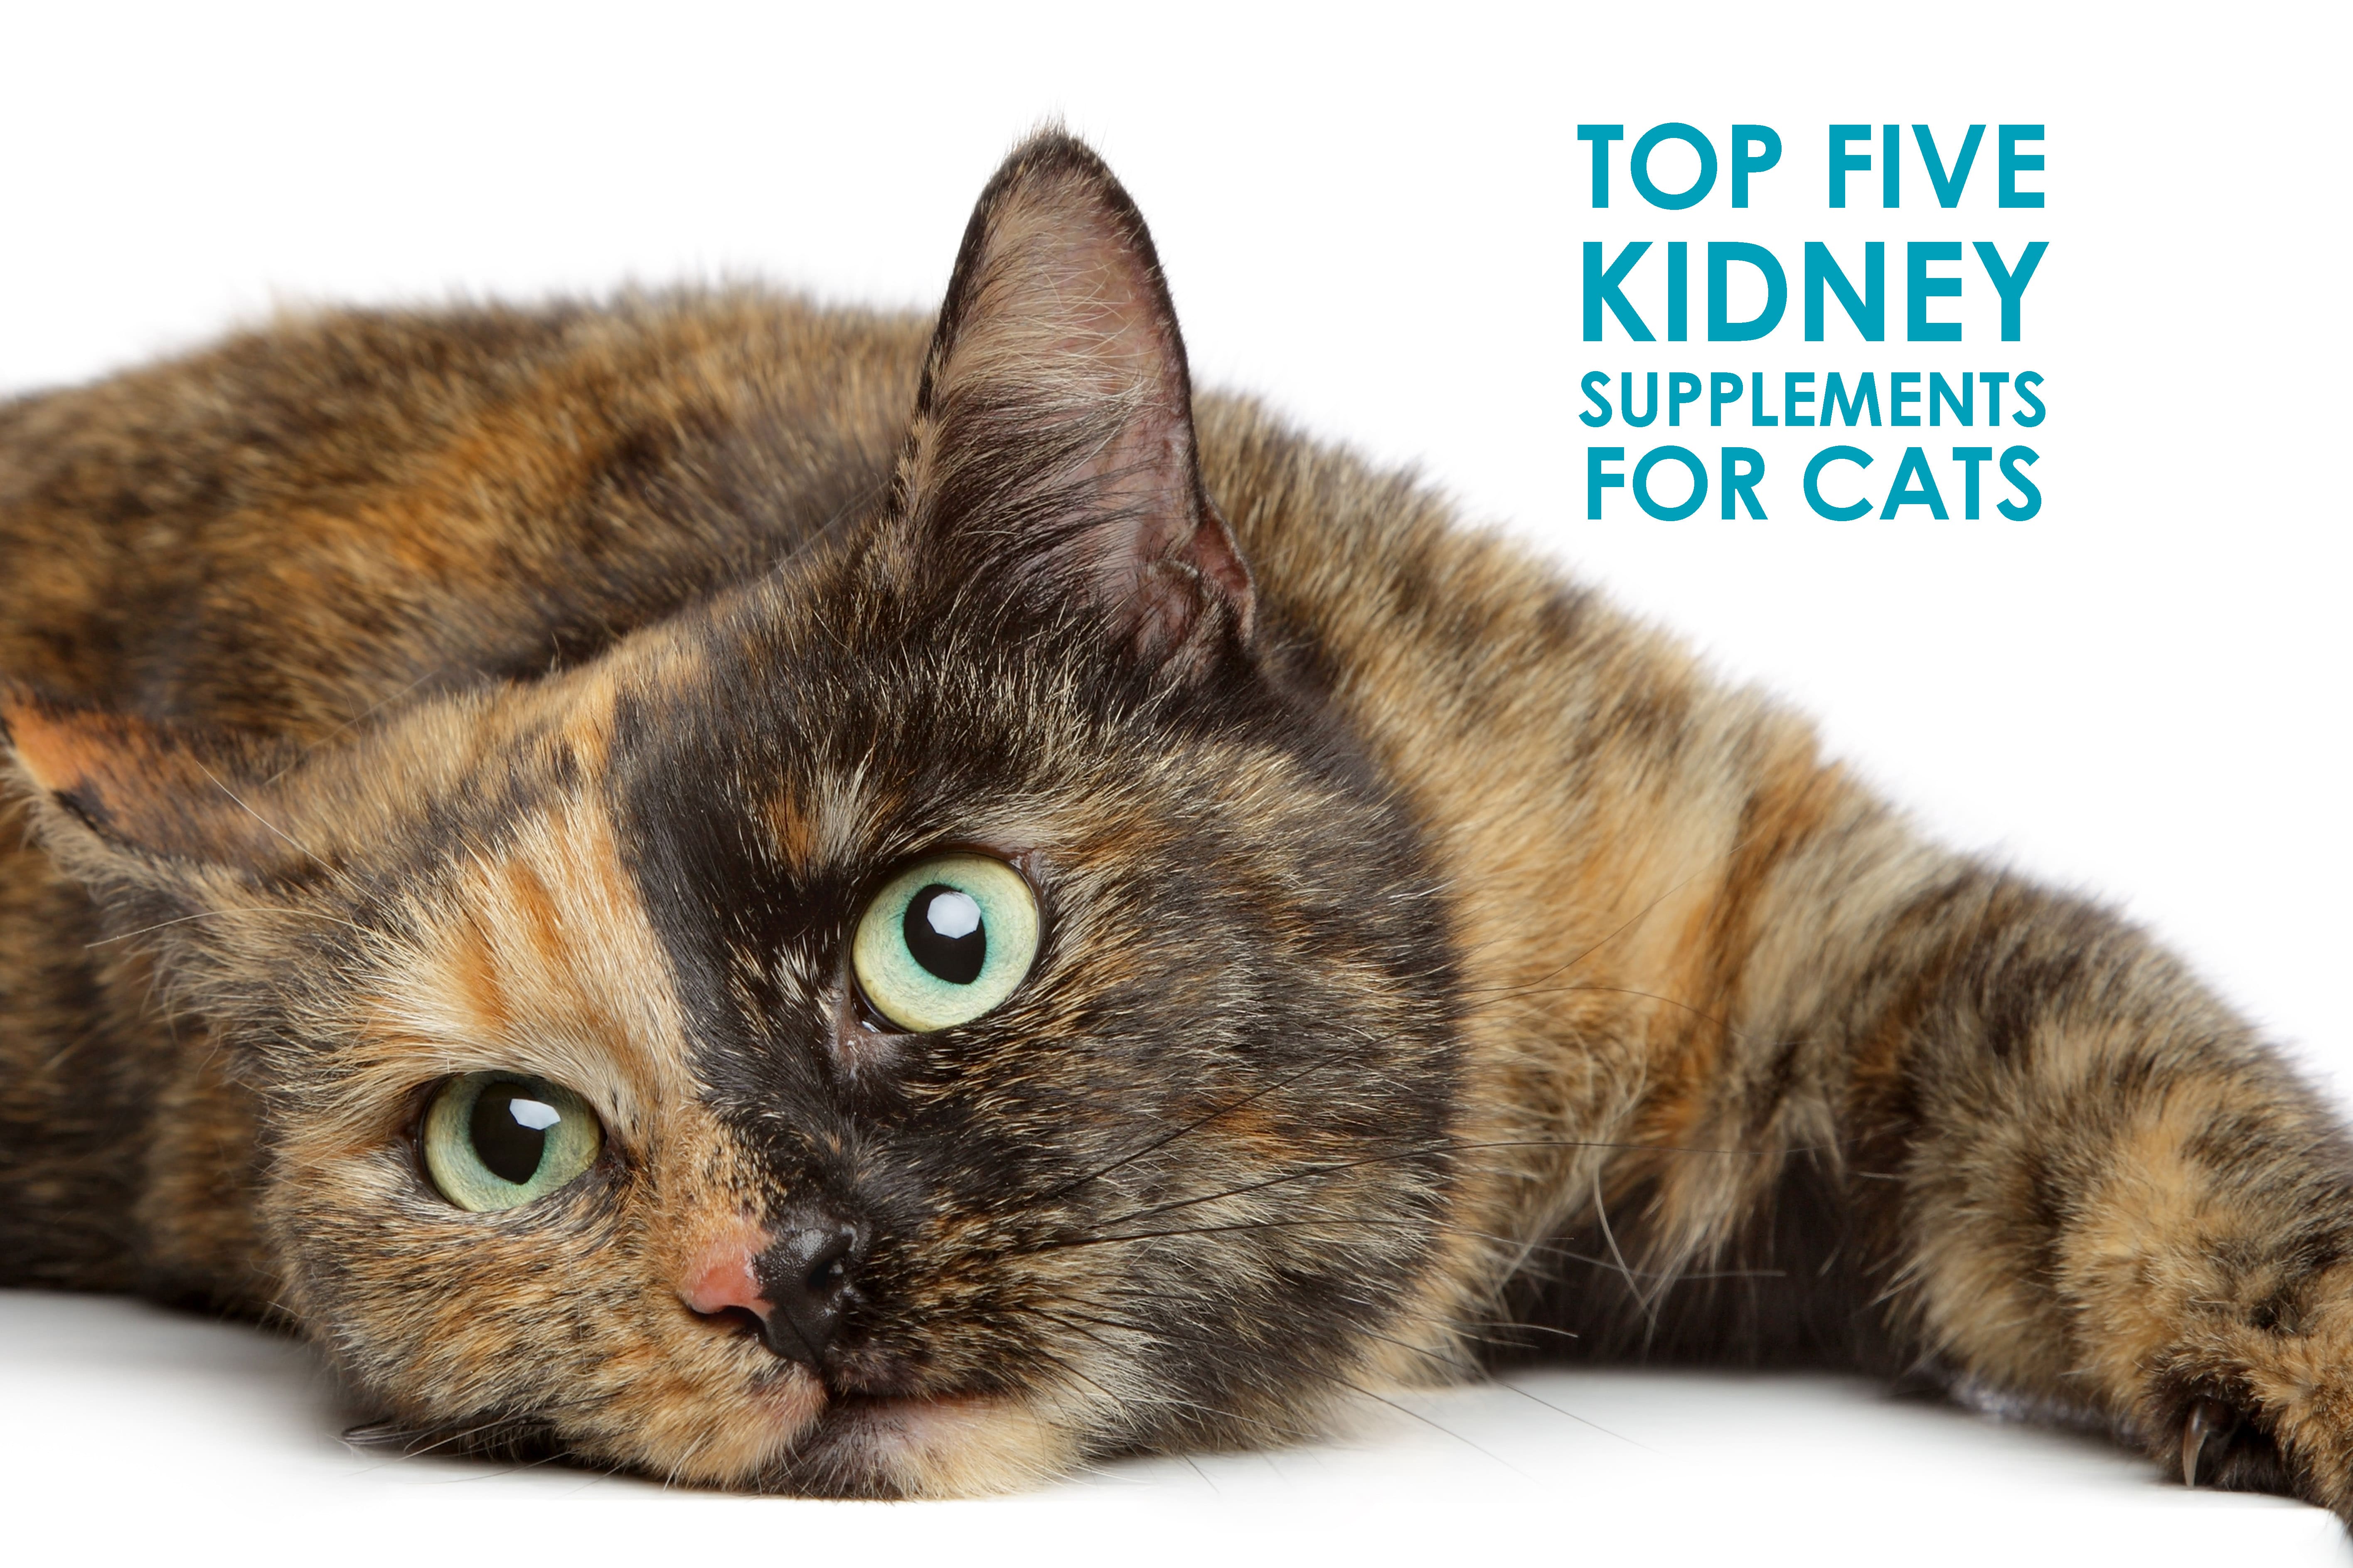 Top 5 Kidney Supplements for Cats 